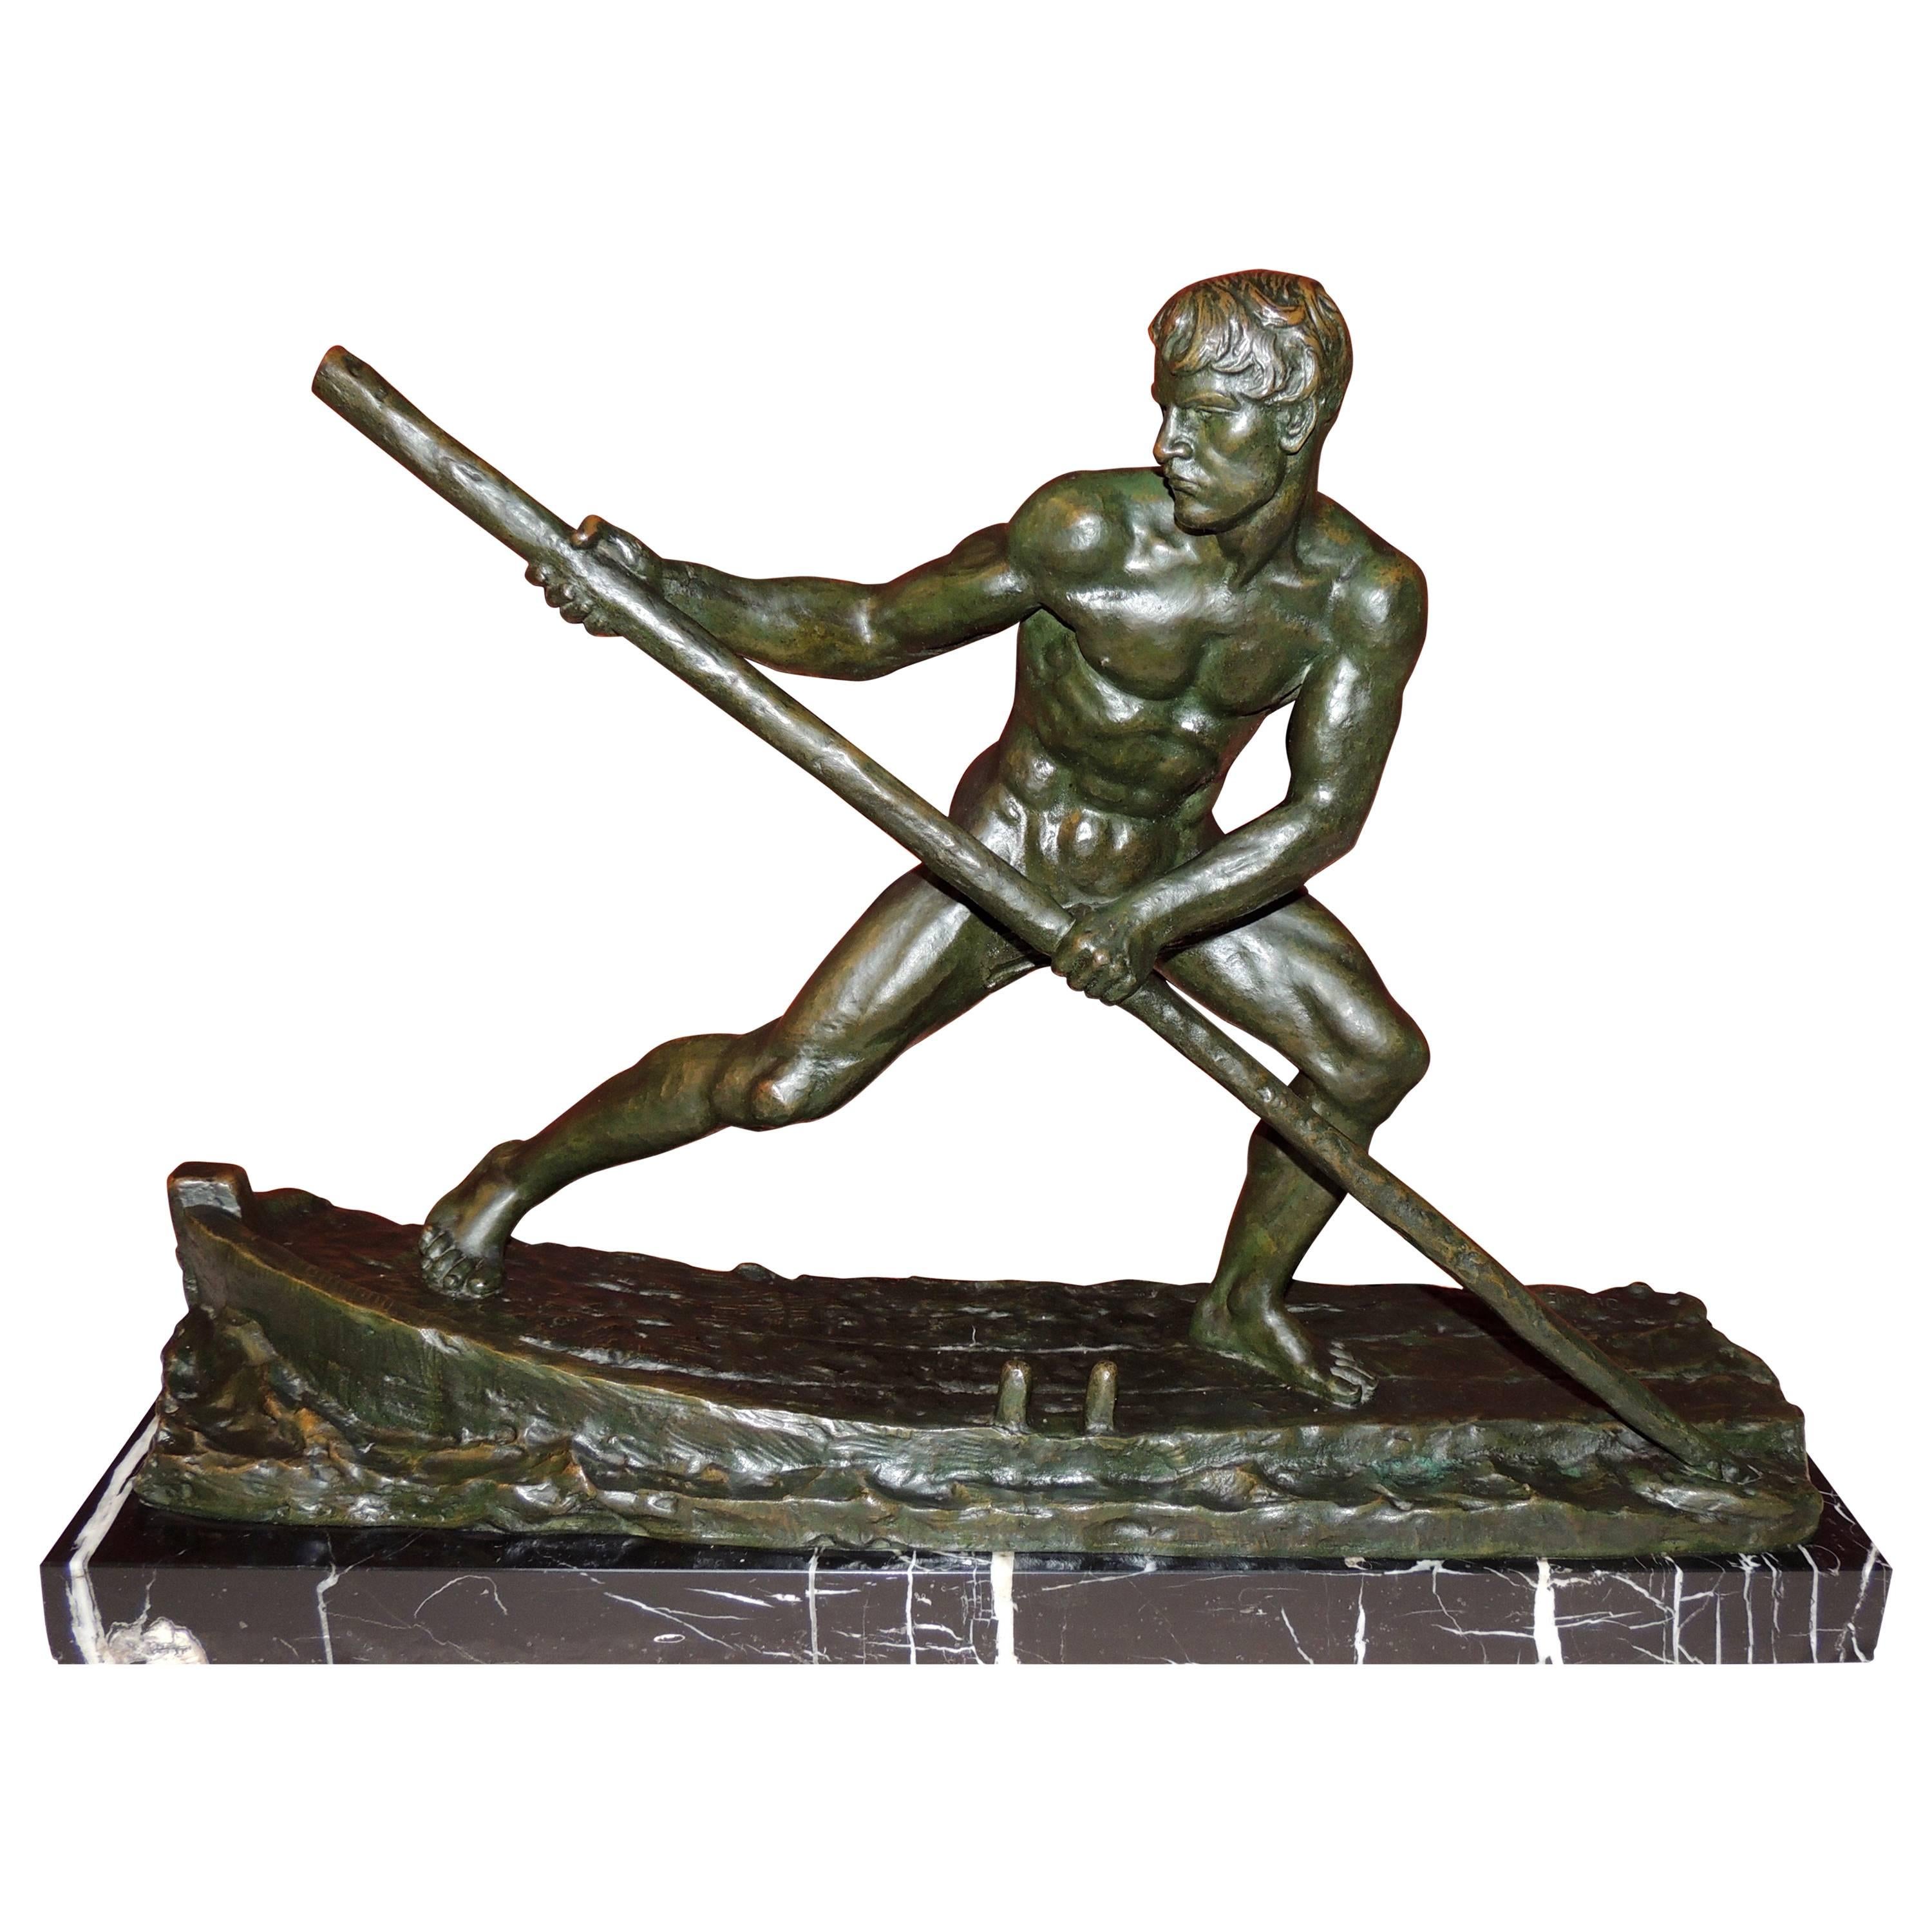 Art Deco Bronze Sculpture of a Man Rowing a Boat by Ouline